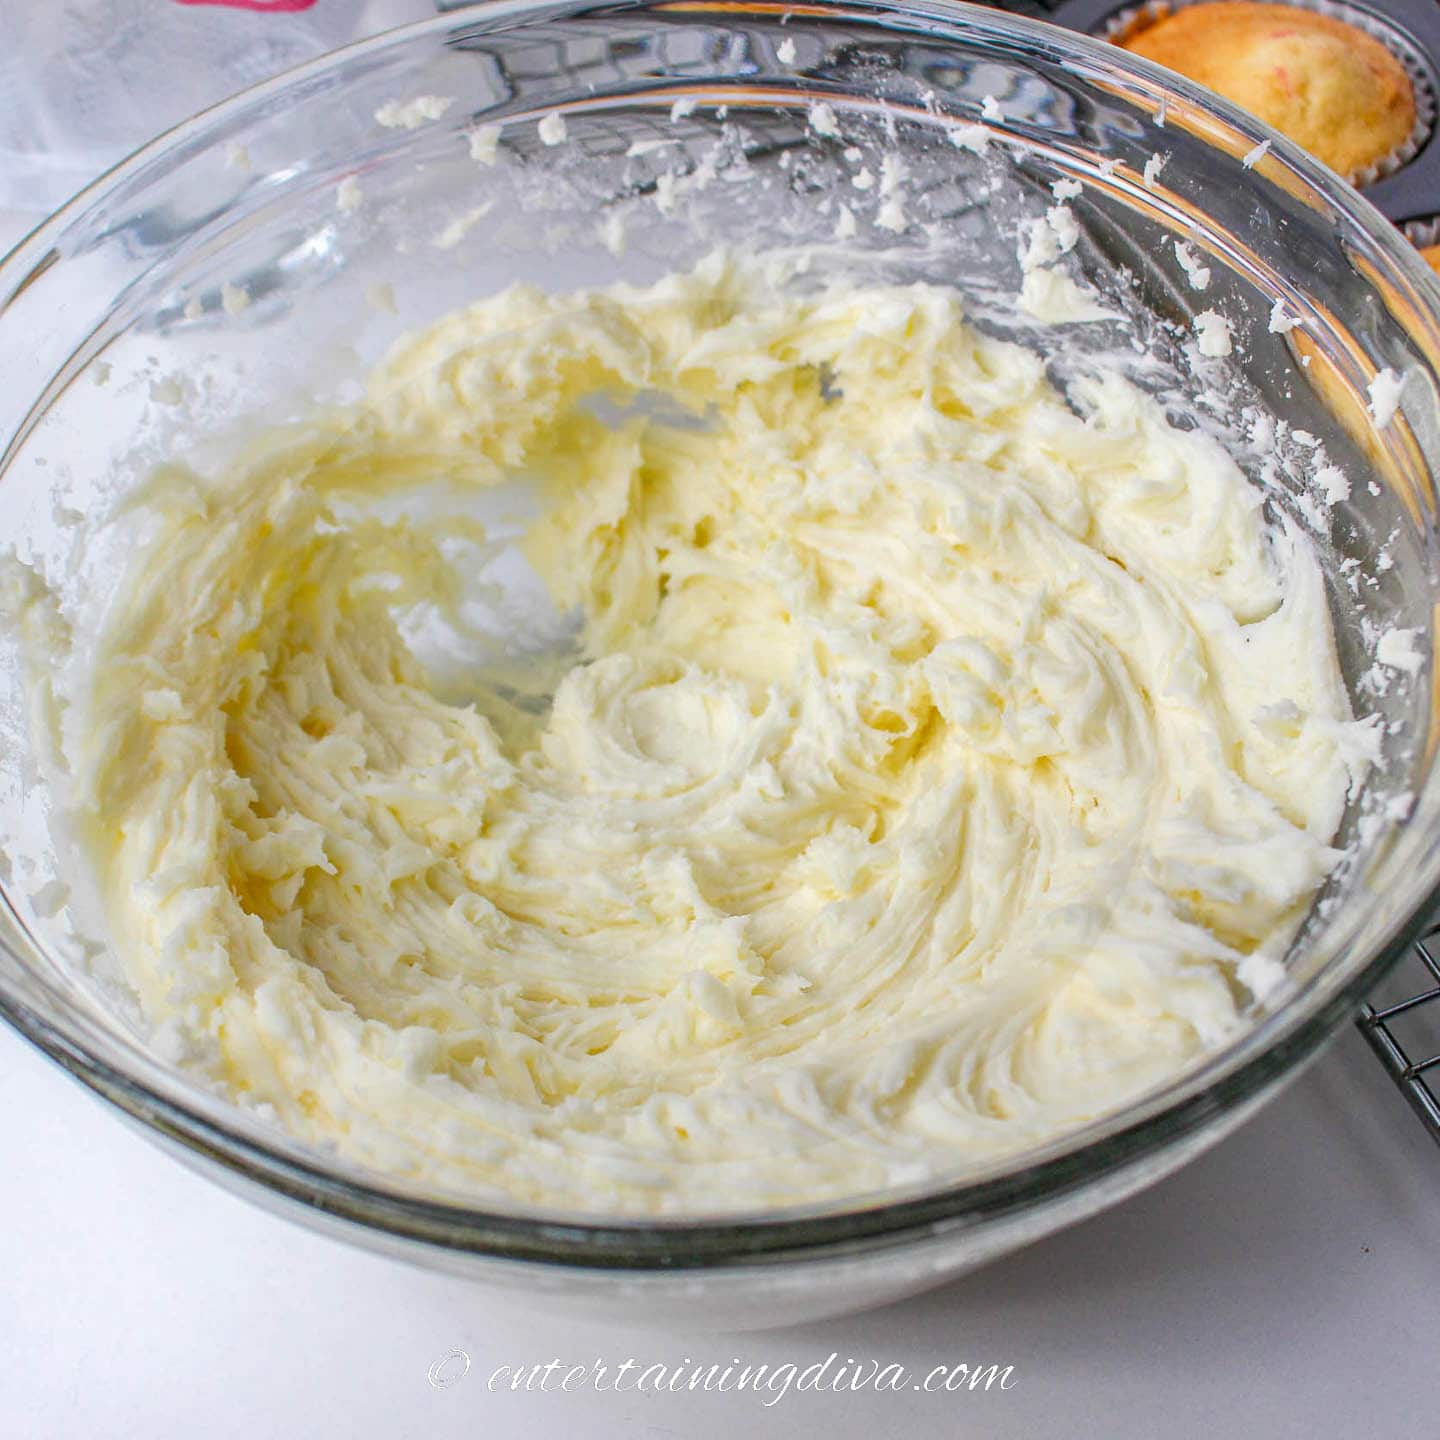 Vanilla buttercream frosting in a bowl